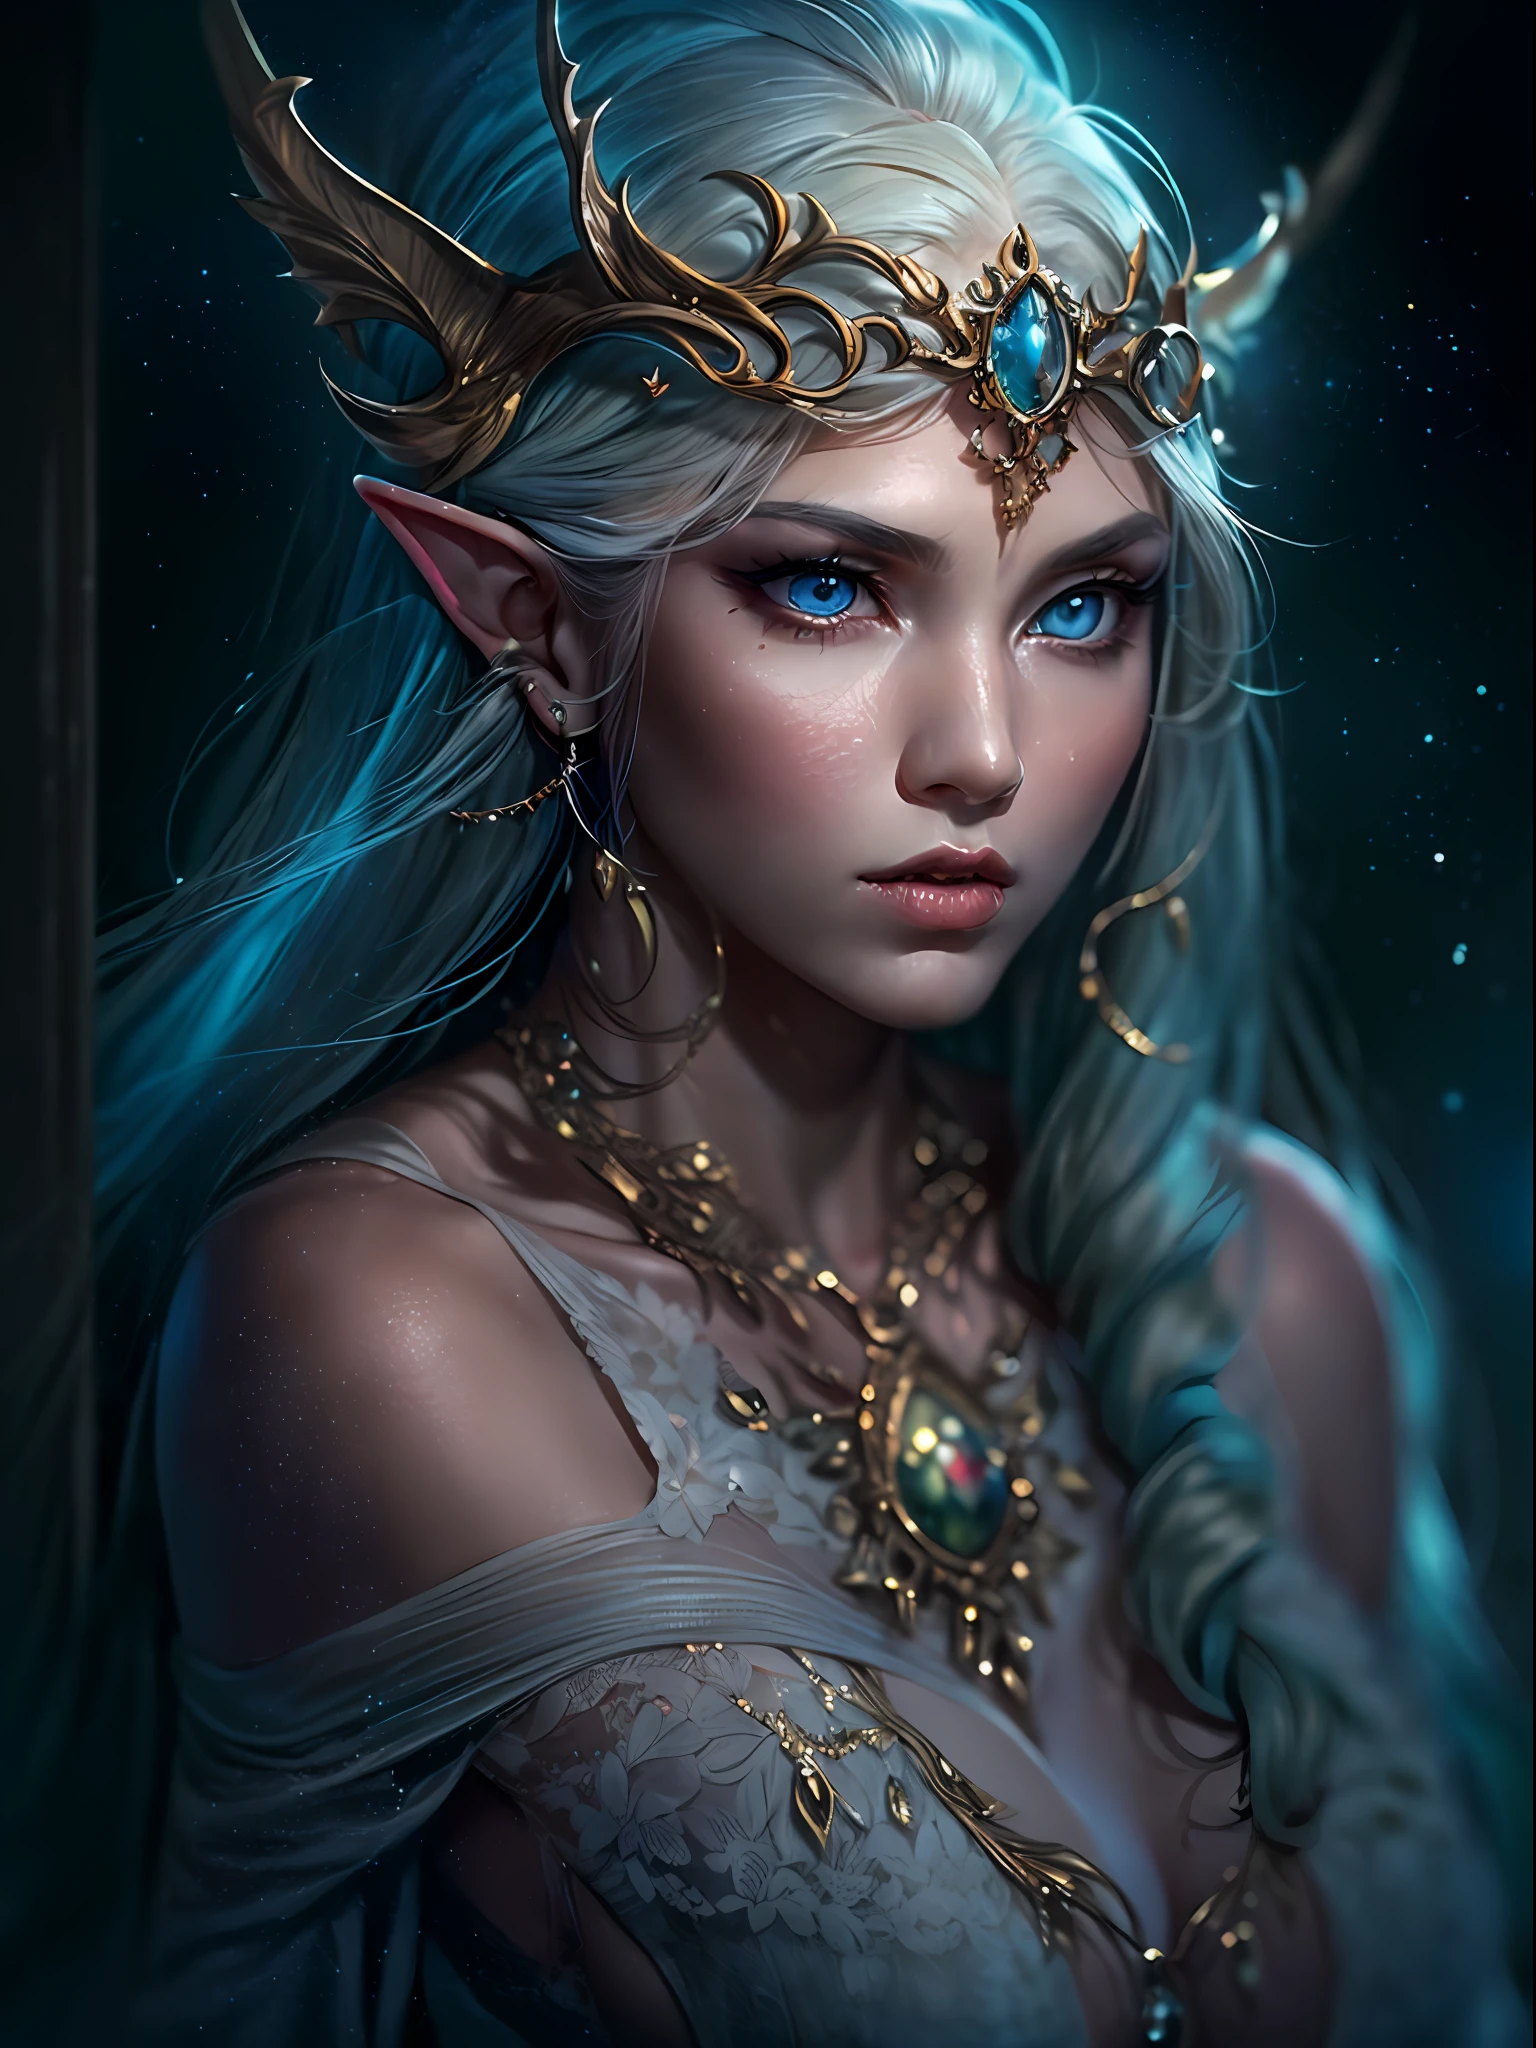 (masterpiece, high resolution:1.3), (studio portrait of an elven woman in profile:1.2), (her deep blue eyes radiating with a powerful glow:1.1), (Nikon Z7 II camera, perfect for capturing intricate details:1.2), (paired with the Nikon NIKKOR Z 85mm f/1.8 S lens:1.2), (the elfa's flawless skin exuding a sense of ethereal beauty:1.1), (her long silver hair cascading gracefully:1.1), (a gentle and kind expression gracing her face:1.1), (the focus on the enchanting profile of the elven woman:1.1), (the studio background a captivating black, emphasizing her presence:1.1), (the elfa adorned with delicate and elegant jewelry:1.1), (a black woolen attire embracing her neck:1.1), (the portrait capturing her mysterious allure and elegance:1.1), (a moment of quiet grace and beauty:1.1), (her captivating eyes drawing viewers into the depths of her soul:1.1), (a timeless portrayal of a mythical being in a studio setting:1.1), (the subtle play of light and shadow accentuating her features:1.1), (a perfect harmony of mystique and elegance:1.1), (the elven woman embodying an ageless beauty:1.1), (an image that transports viewers to a realm of fantasy and wonder:1.1), (the impeccable studio lighting highlighting her every detail:1.1), (a captivating and serene representation of an ethereal creature:1.1), (a moment captured in time, where fantasy meets reality:1.1), (the studio setting adding a sense of timelessness to the portrait:1.1), (a portrayal of an elven woman that captivates with her enchanting presence:1.1), (the combination of her glowing eyes and gentle expression creating an otherworldly atmosphere:1.1), (a studio portrait that showcases the beauty and allure of mythical beings:1.1)